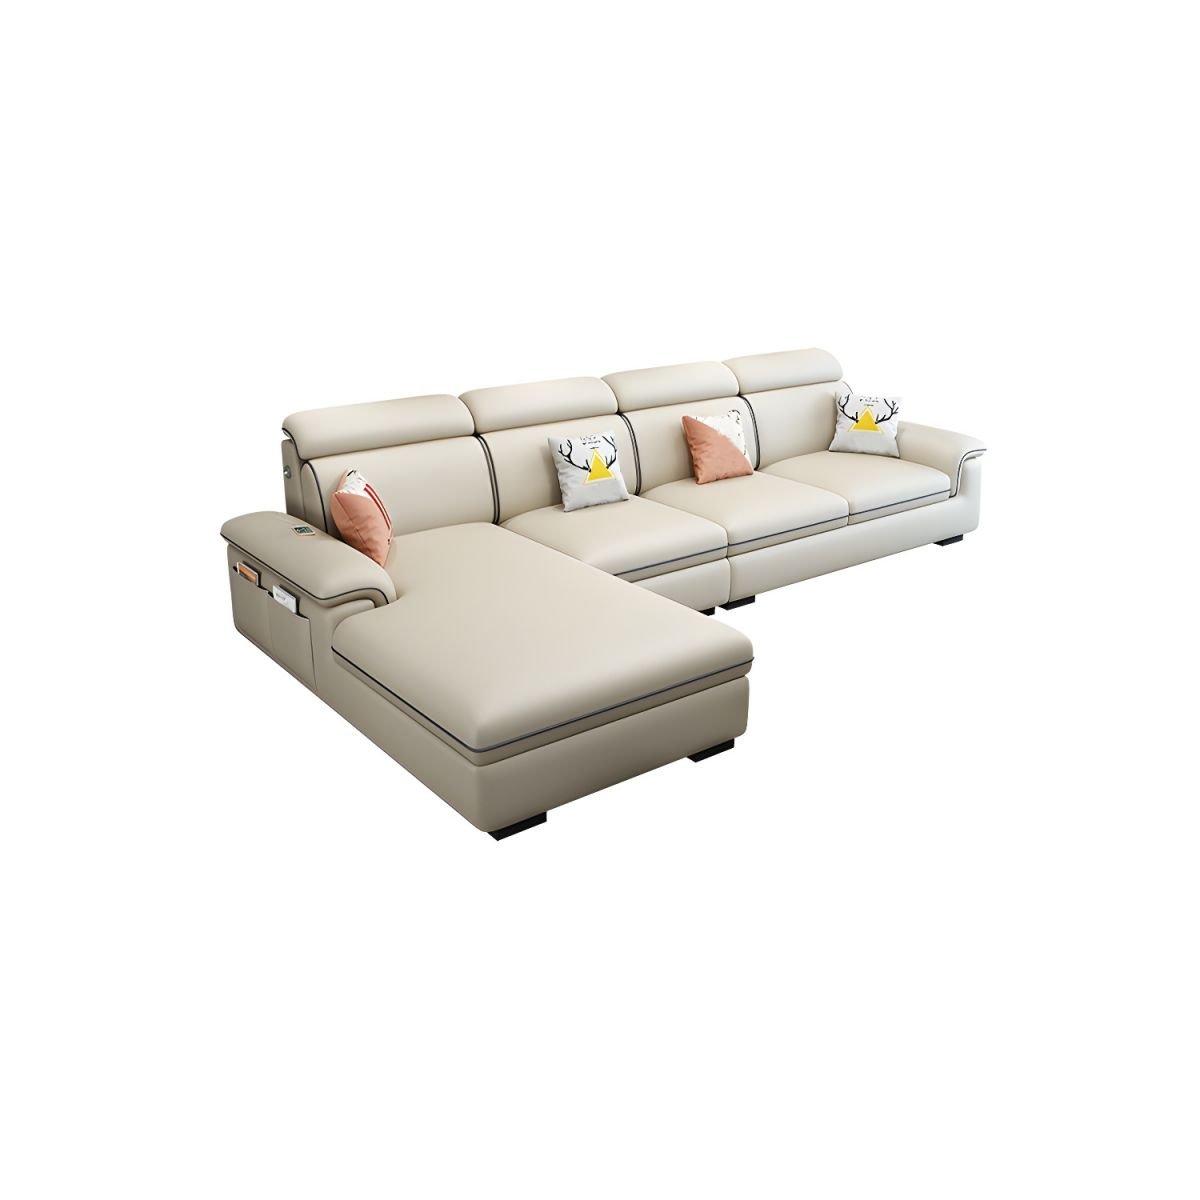 Wooden Modern 9 Feet L-Shape Sectionals No Distressing Seats 4 Storage Included Sofa Chaise - Tech Cloth Off-White Left